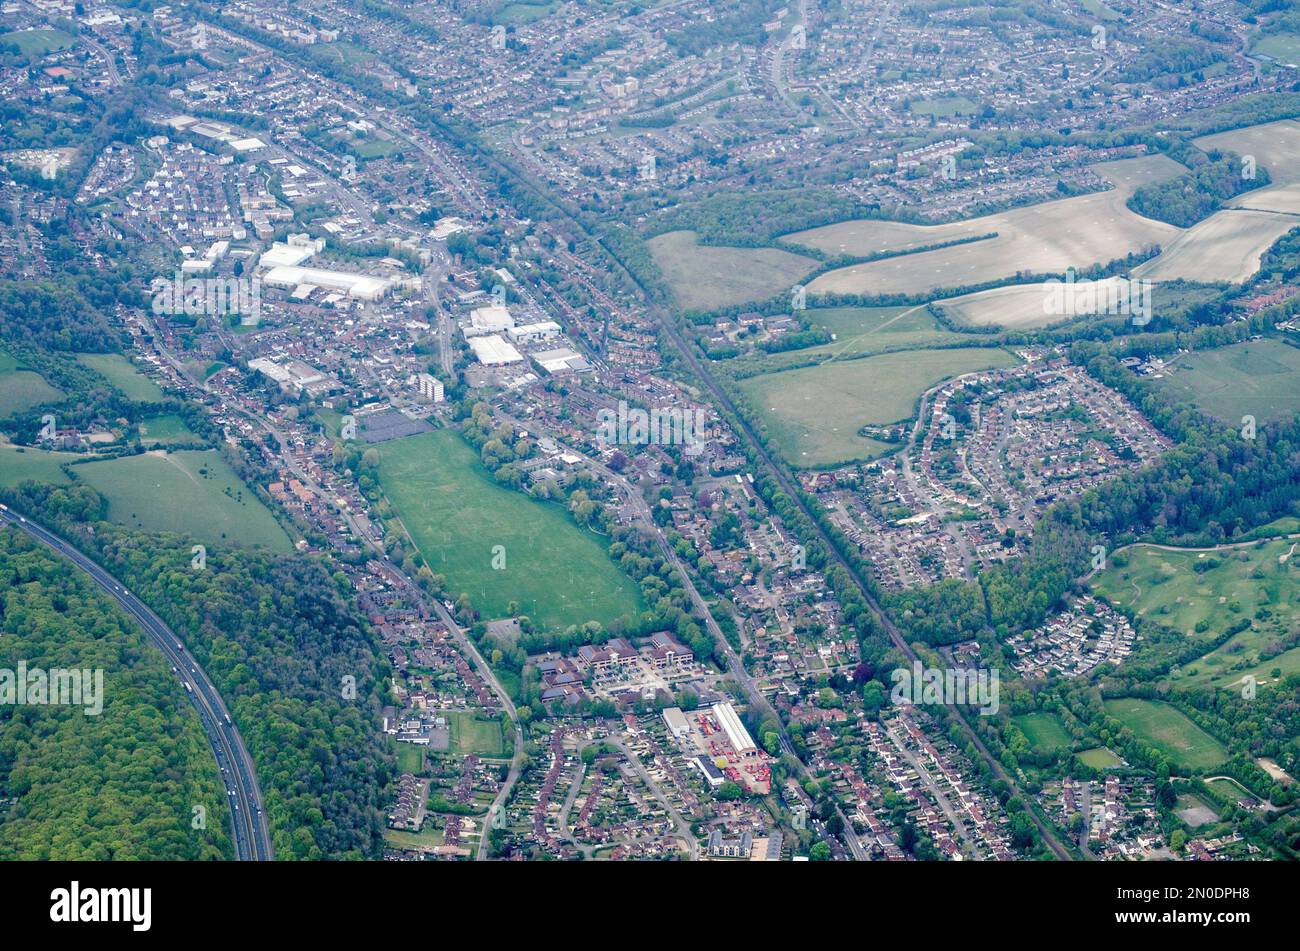 Aerial view of the Loudwater district of High Wycombe in Buckinghamshire on a Spring afternoon.  The Chiltern Railway line and M40 motorway both cut t Stock Photo